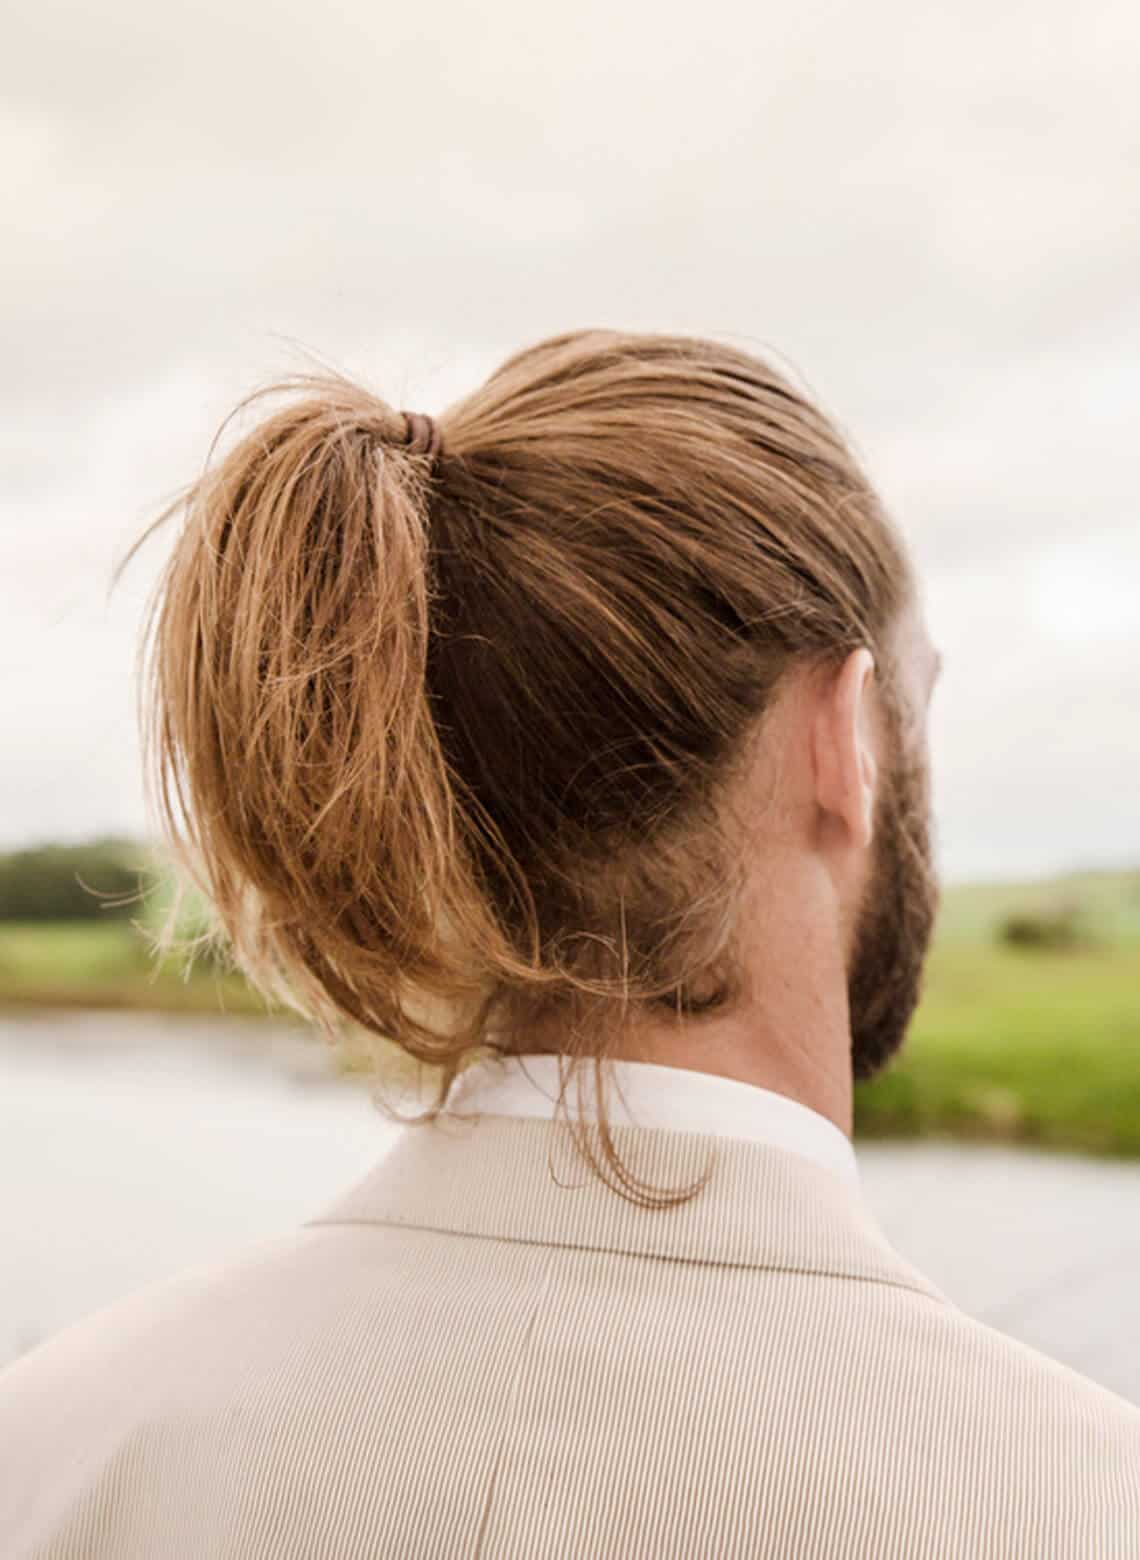 man with ponytail
